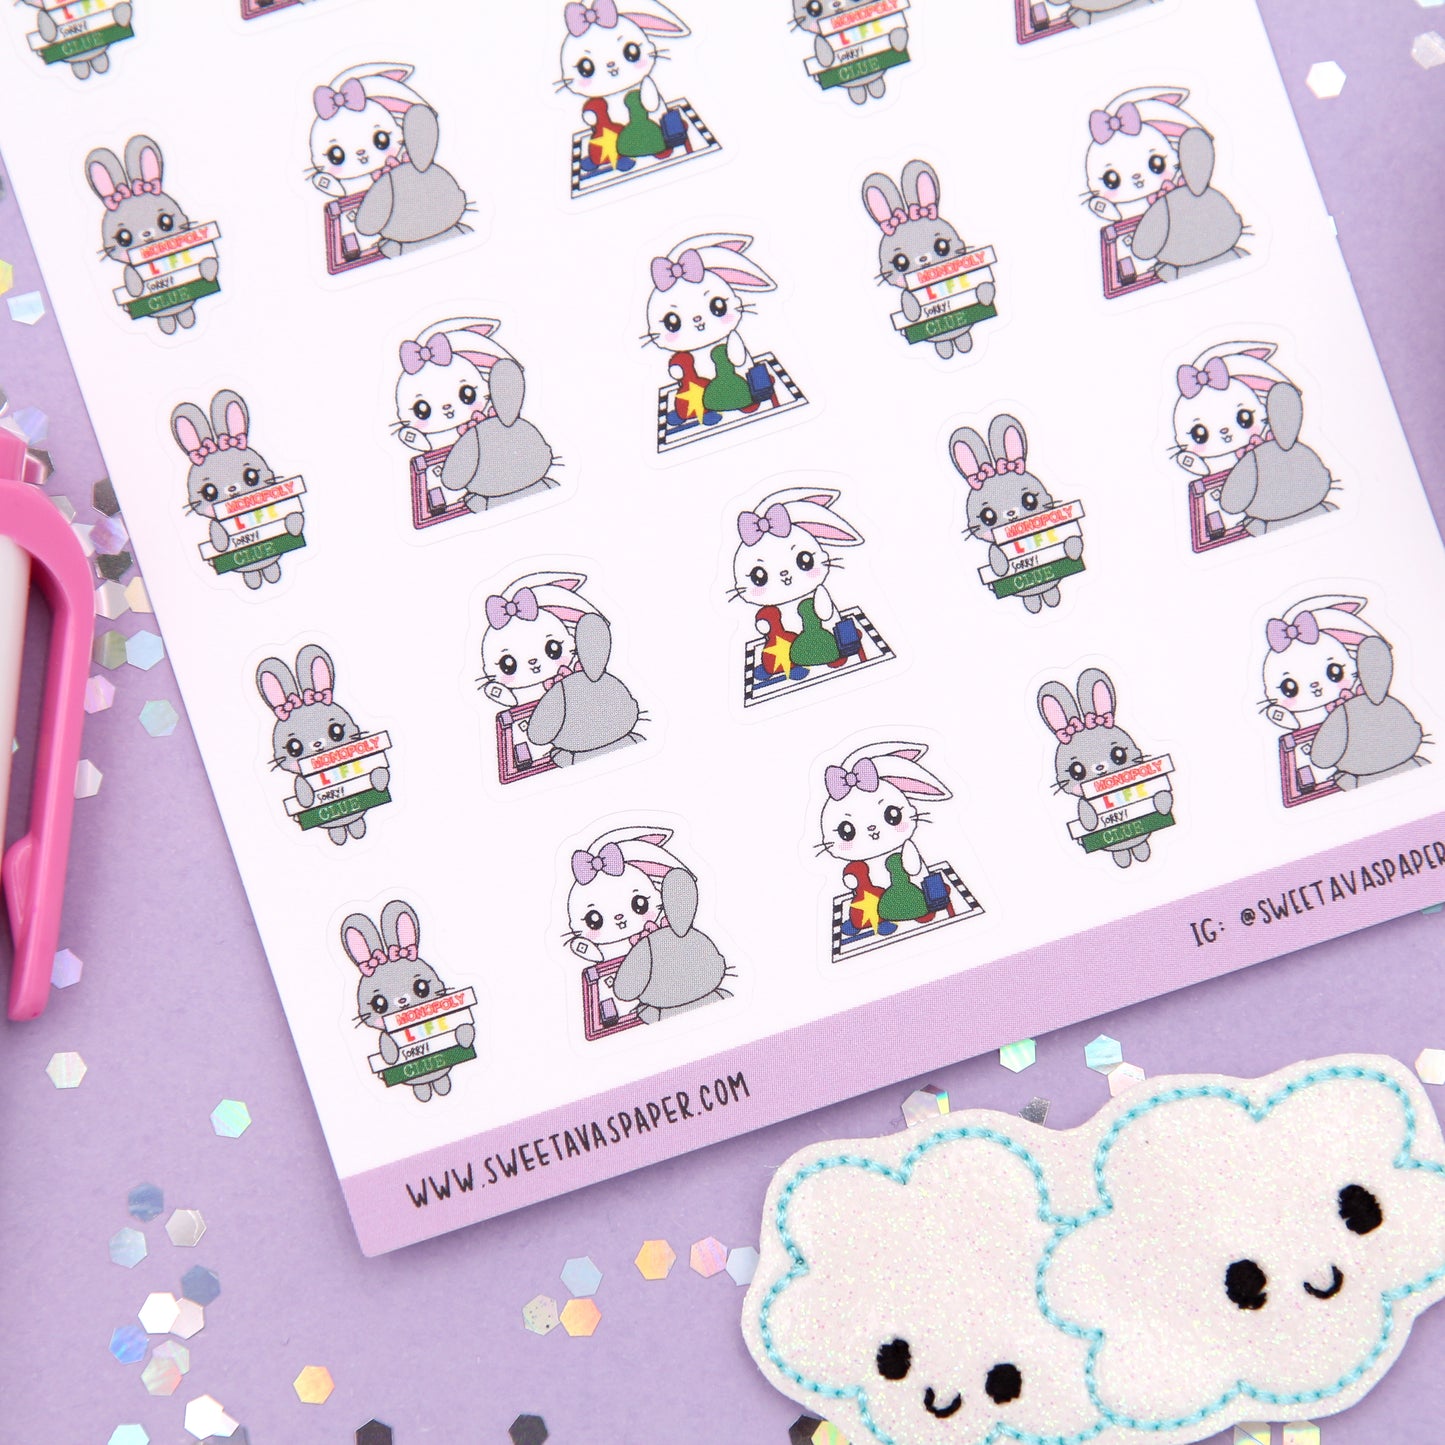 Board Games Planner Stickers - Stormy & Cloudy Bunnies  - [918]